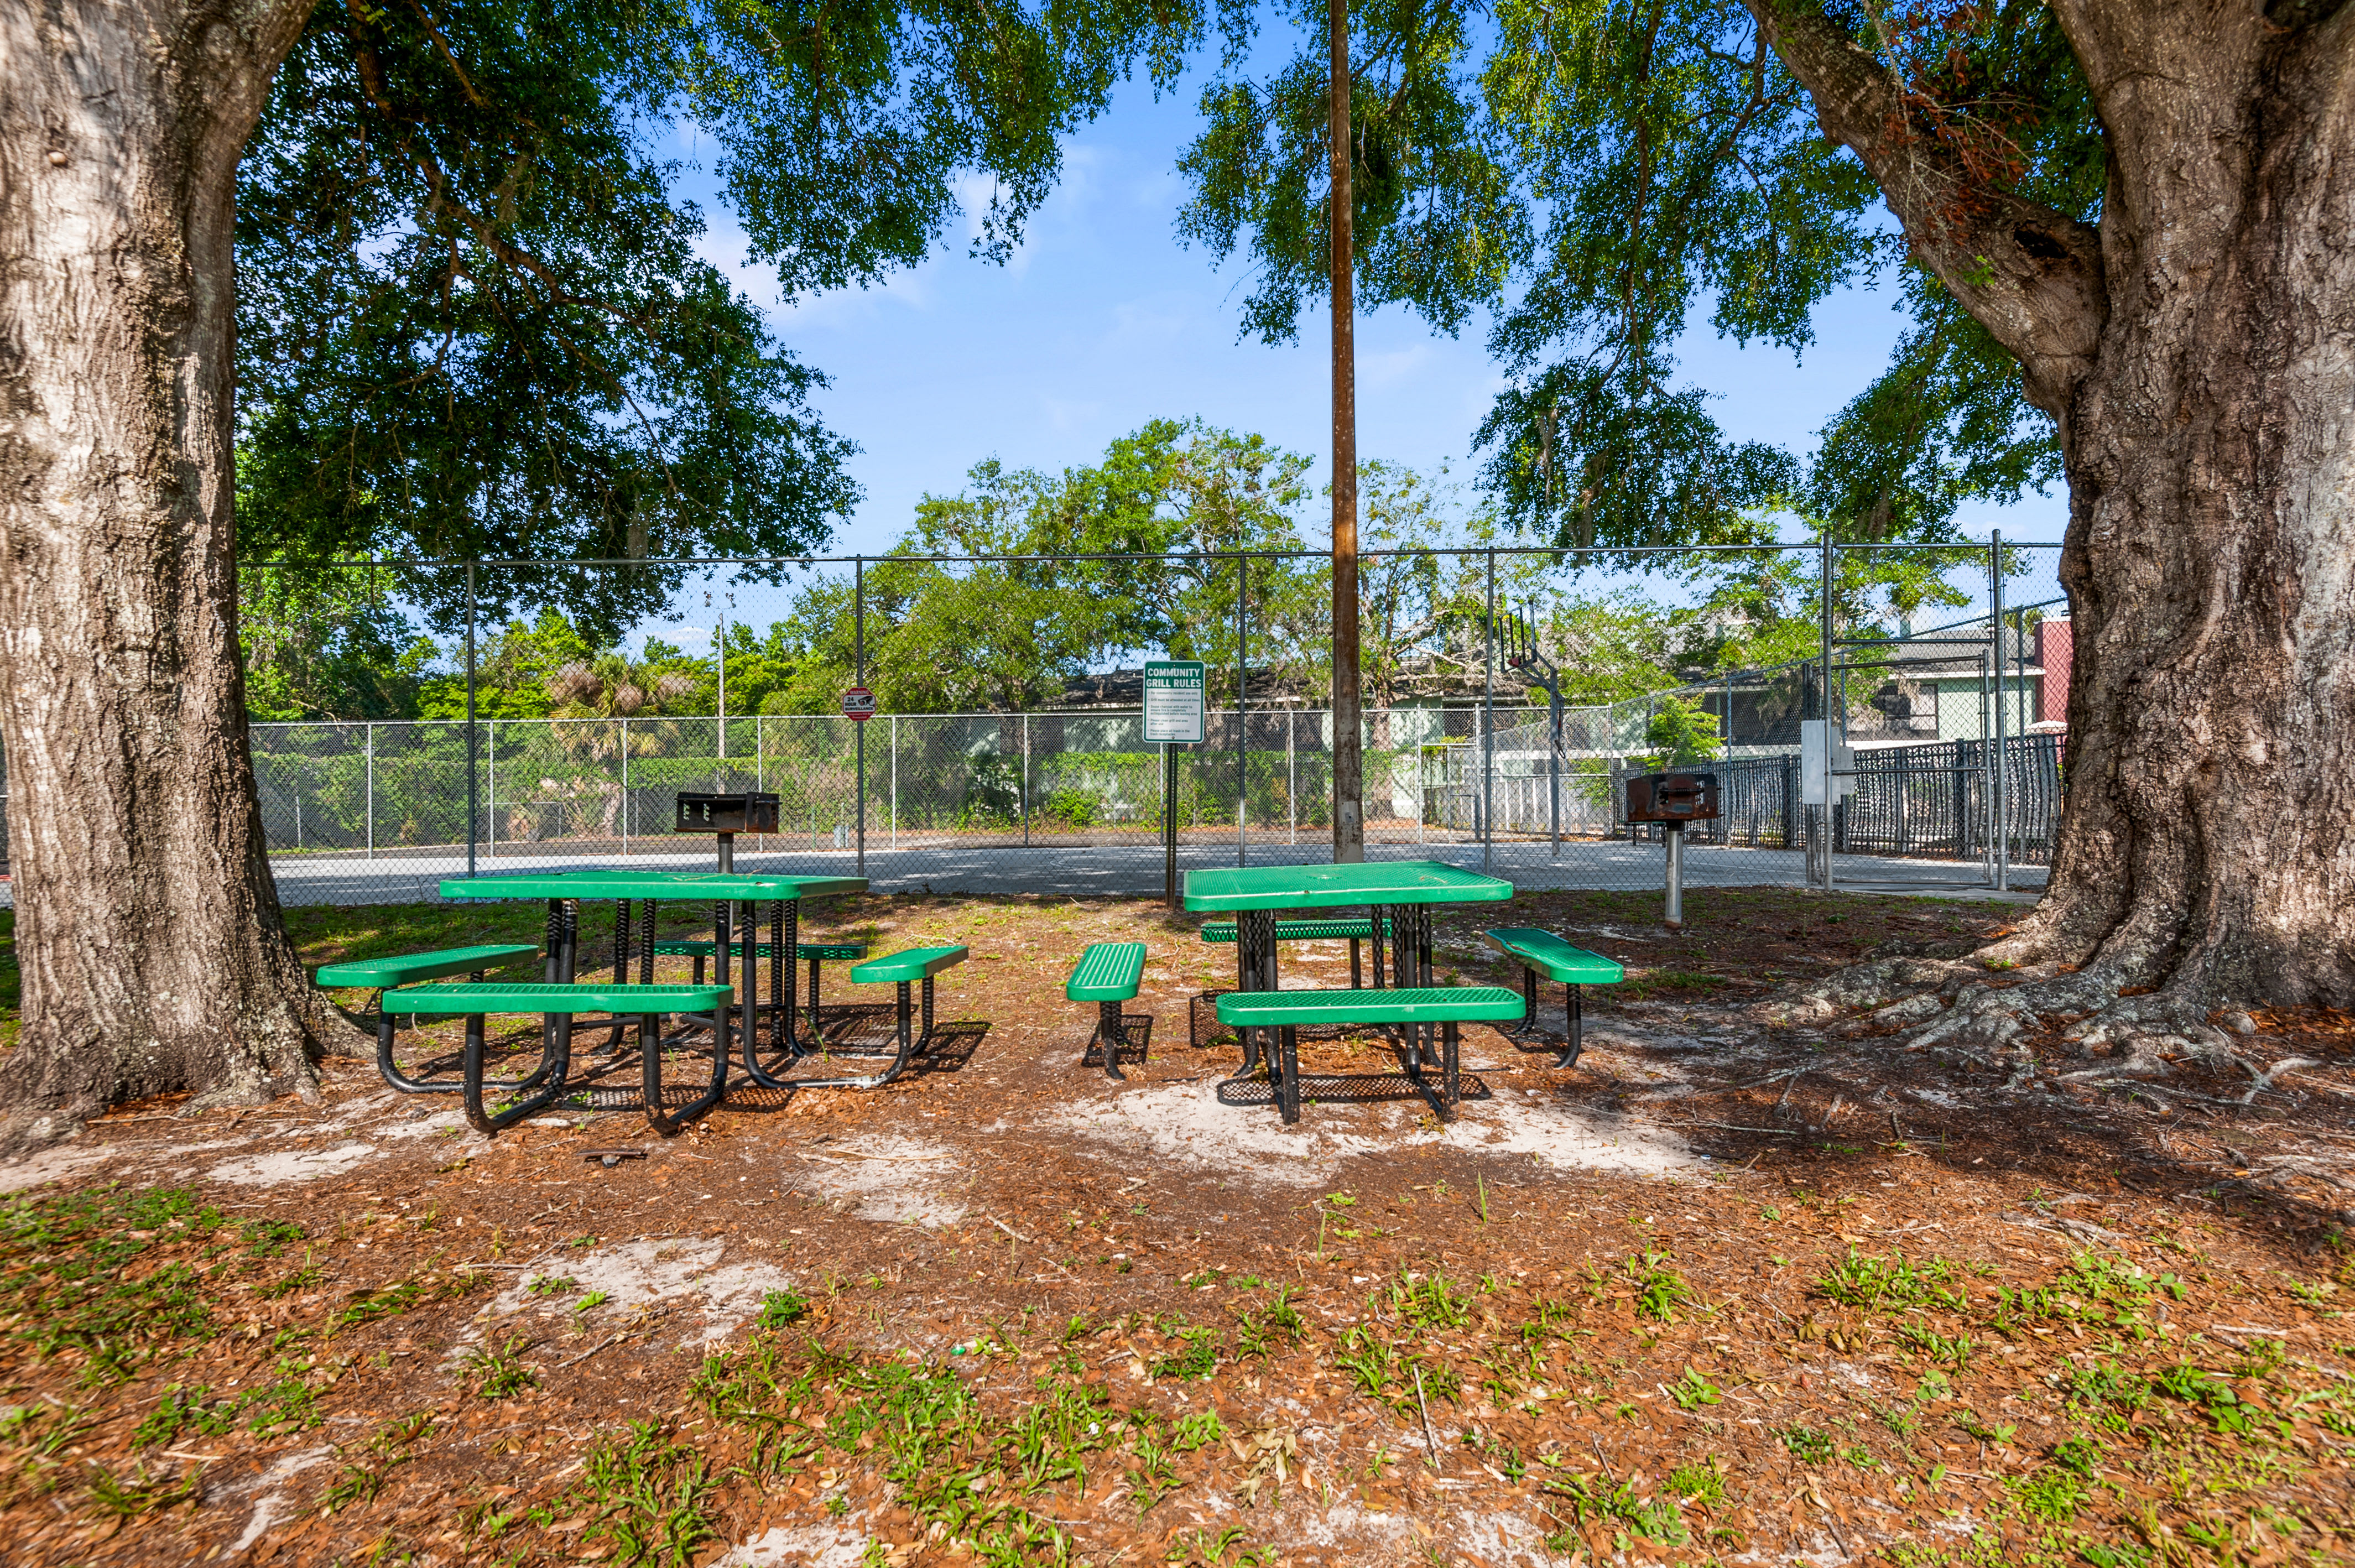 View amenities like our picnic area at Stone Creek at Wekiva in Altamonte Springs, Florida